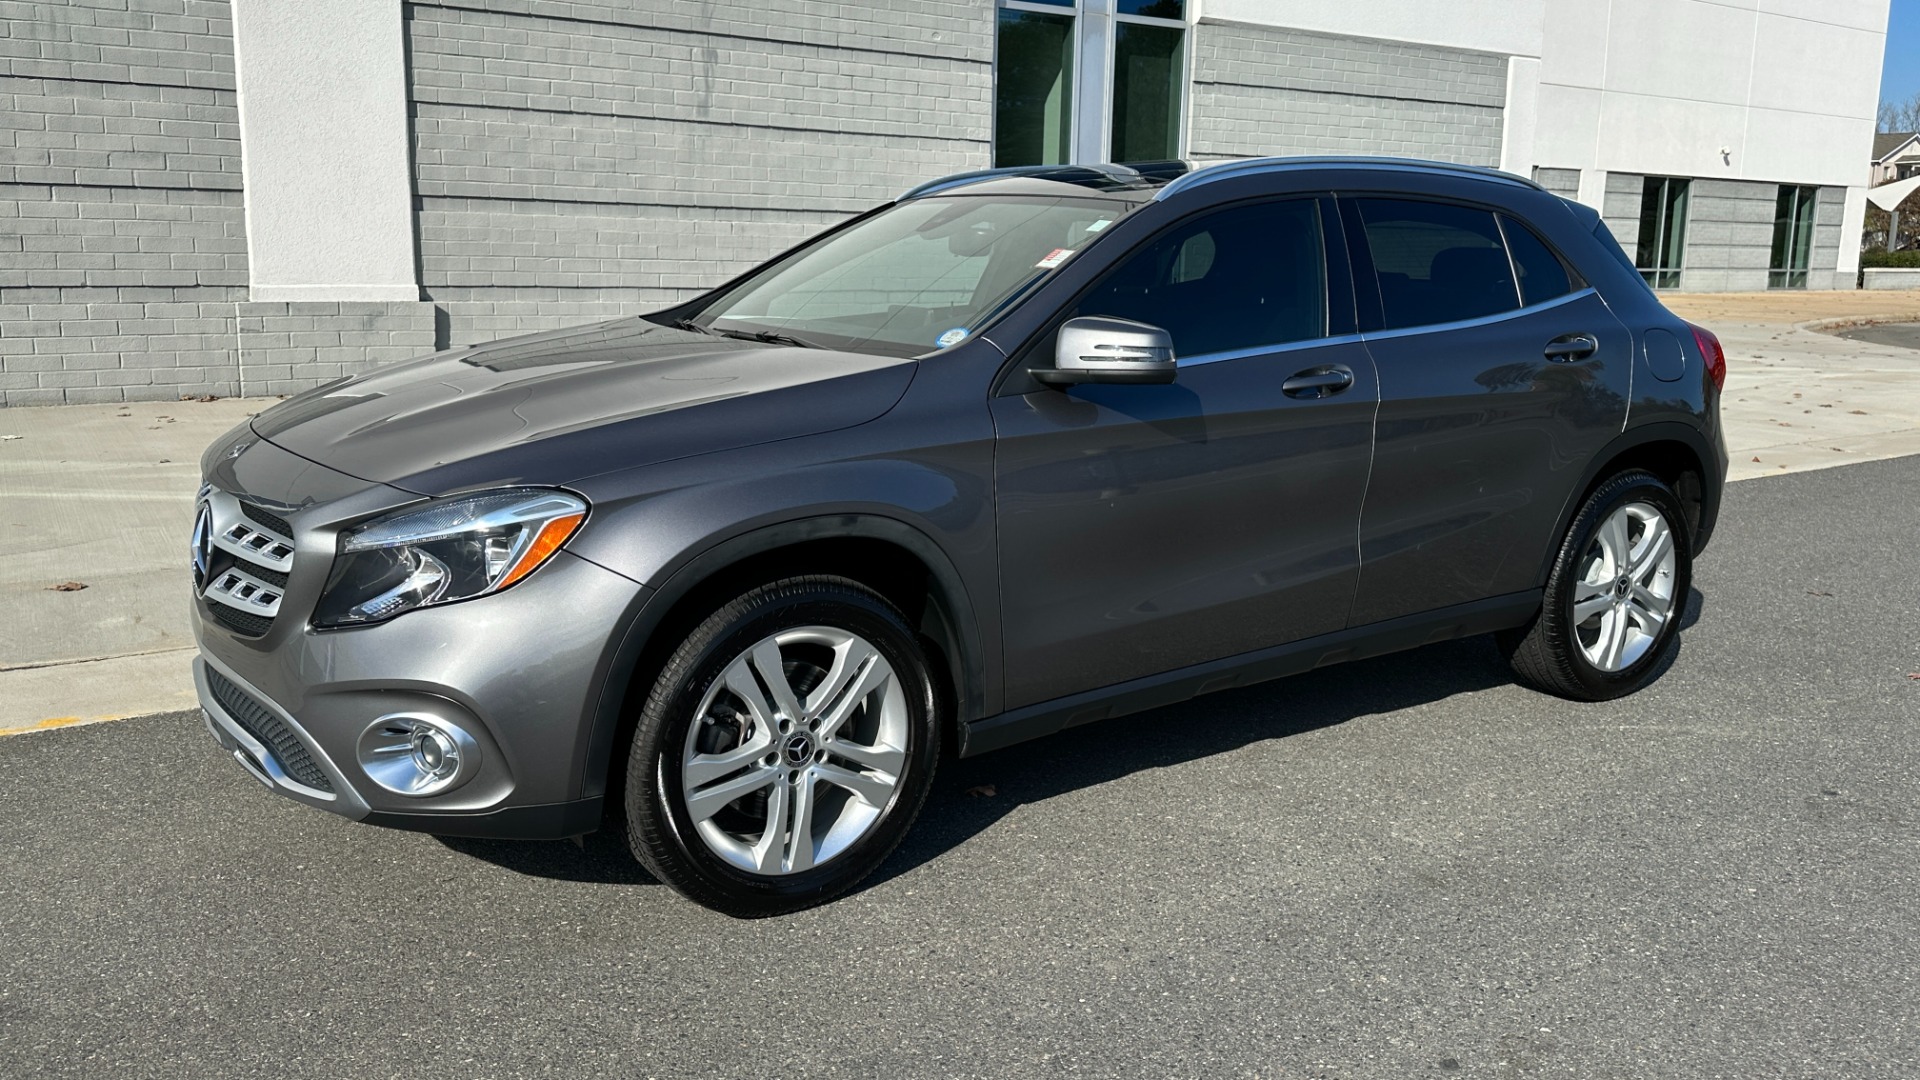 Used 2018 Mercedes-Benz GLA GLA 250 / PANORAMIC SUNROOF / BLIND SPOT ASSIST / HEATED FRONT SEATS for sale $27,999 at Formula Imports in Charlotte NC 28227 2